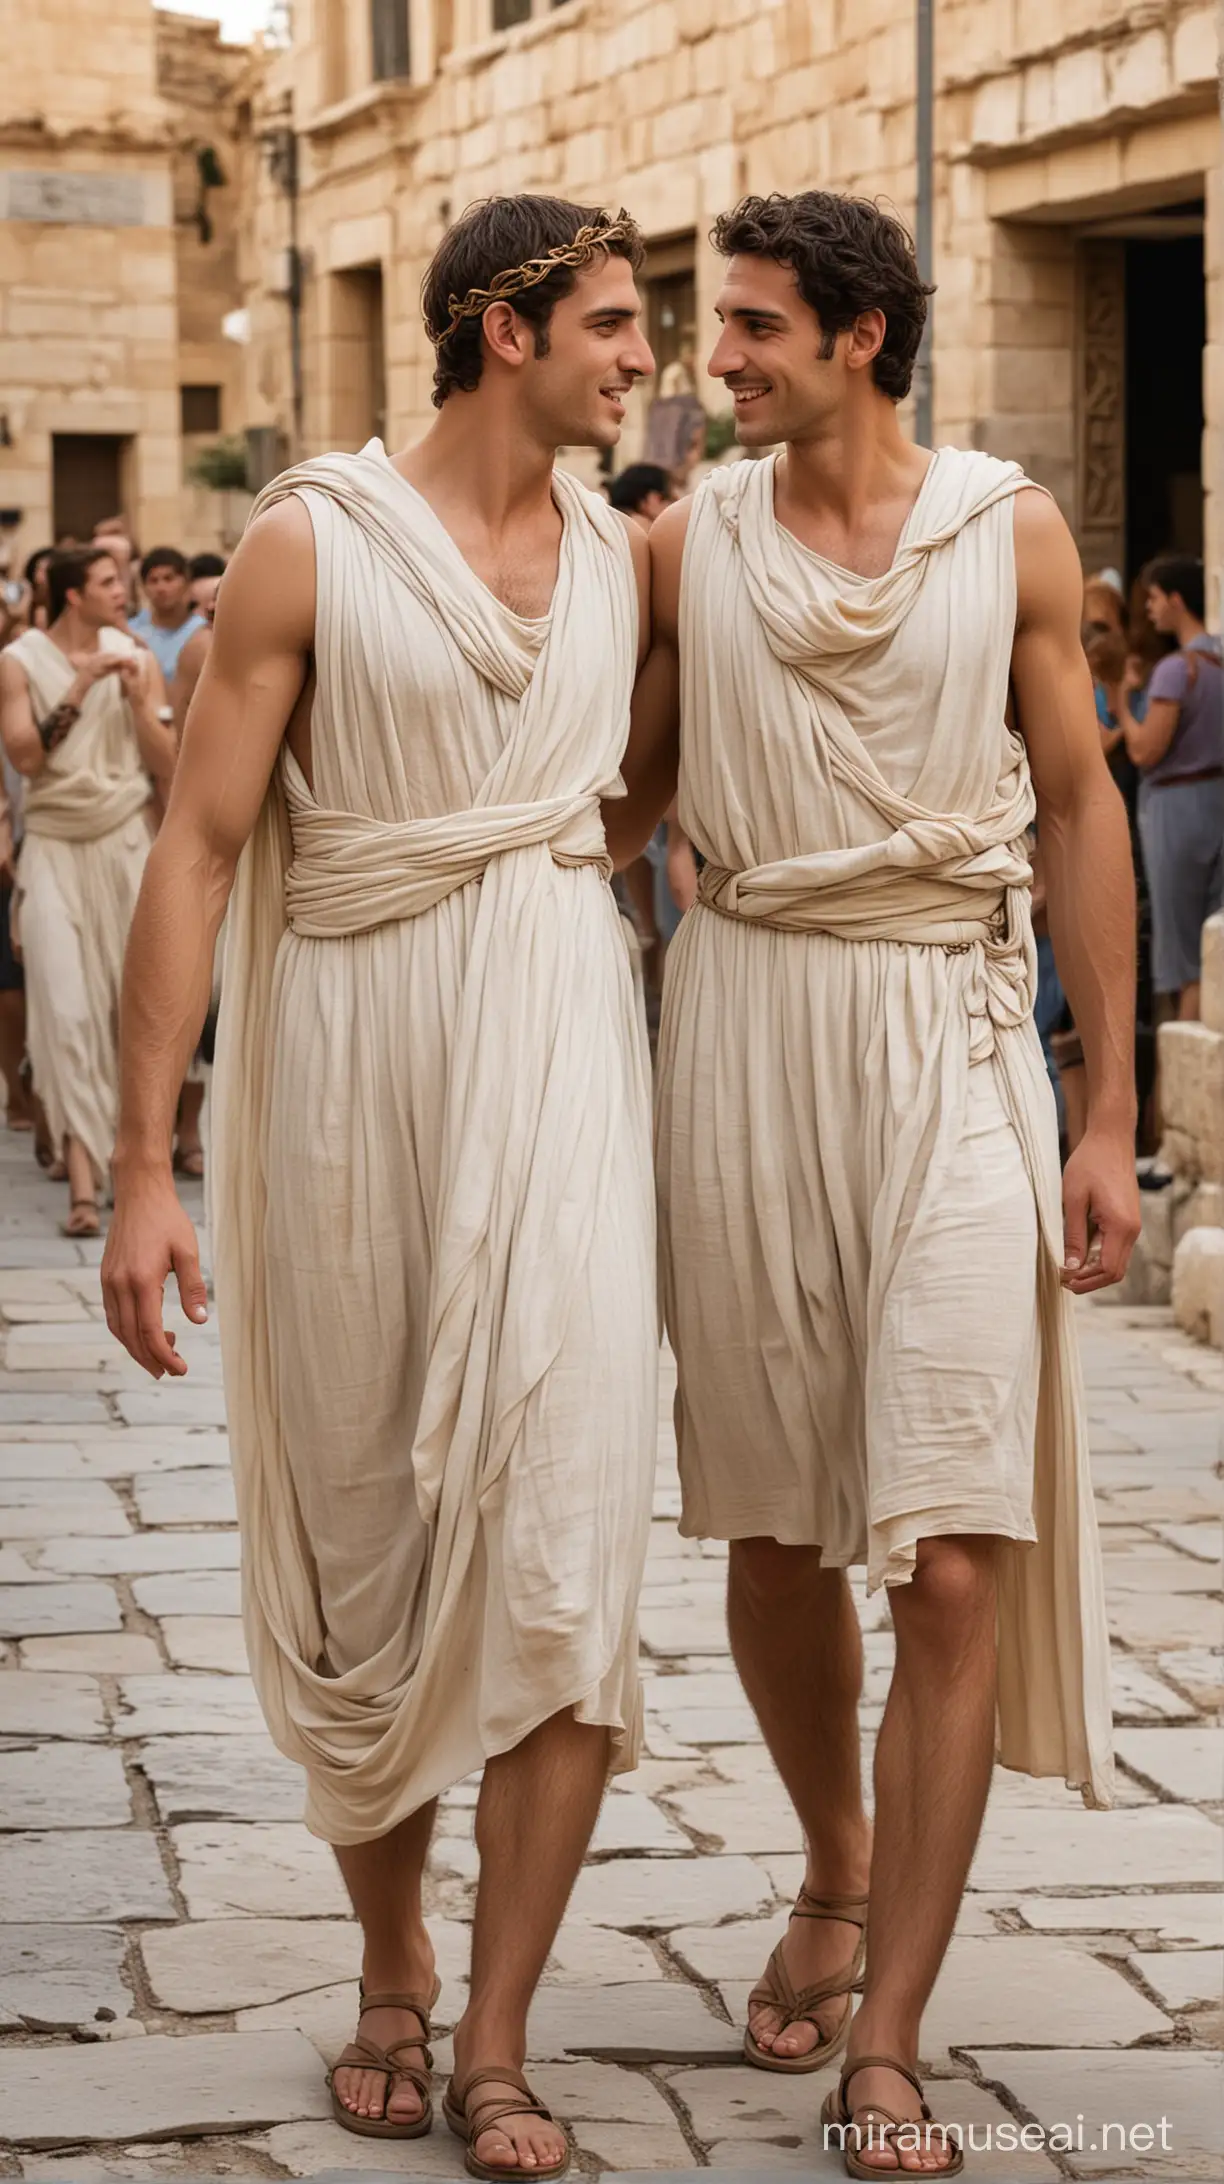 Ancient Greece Street Scenes Love Among Diverse Relationships